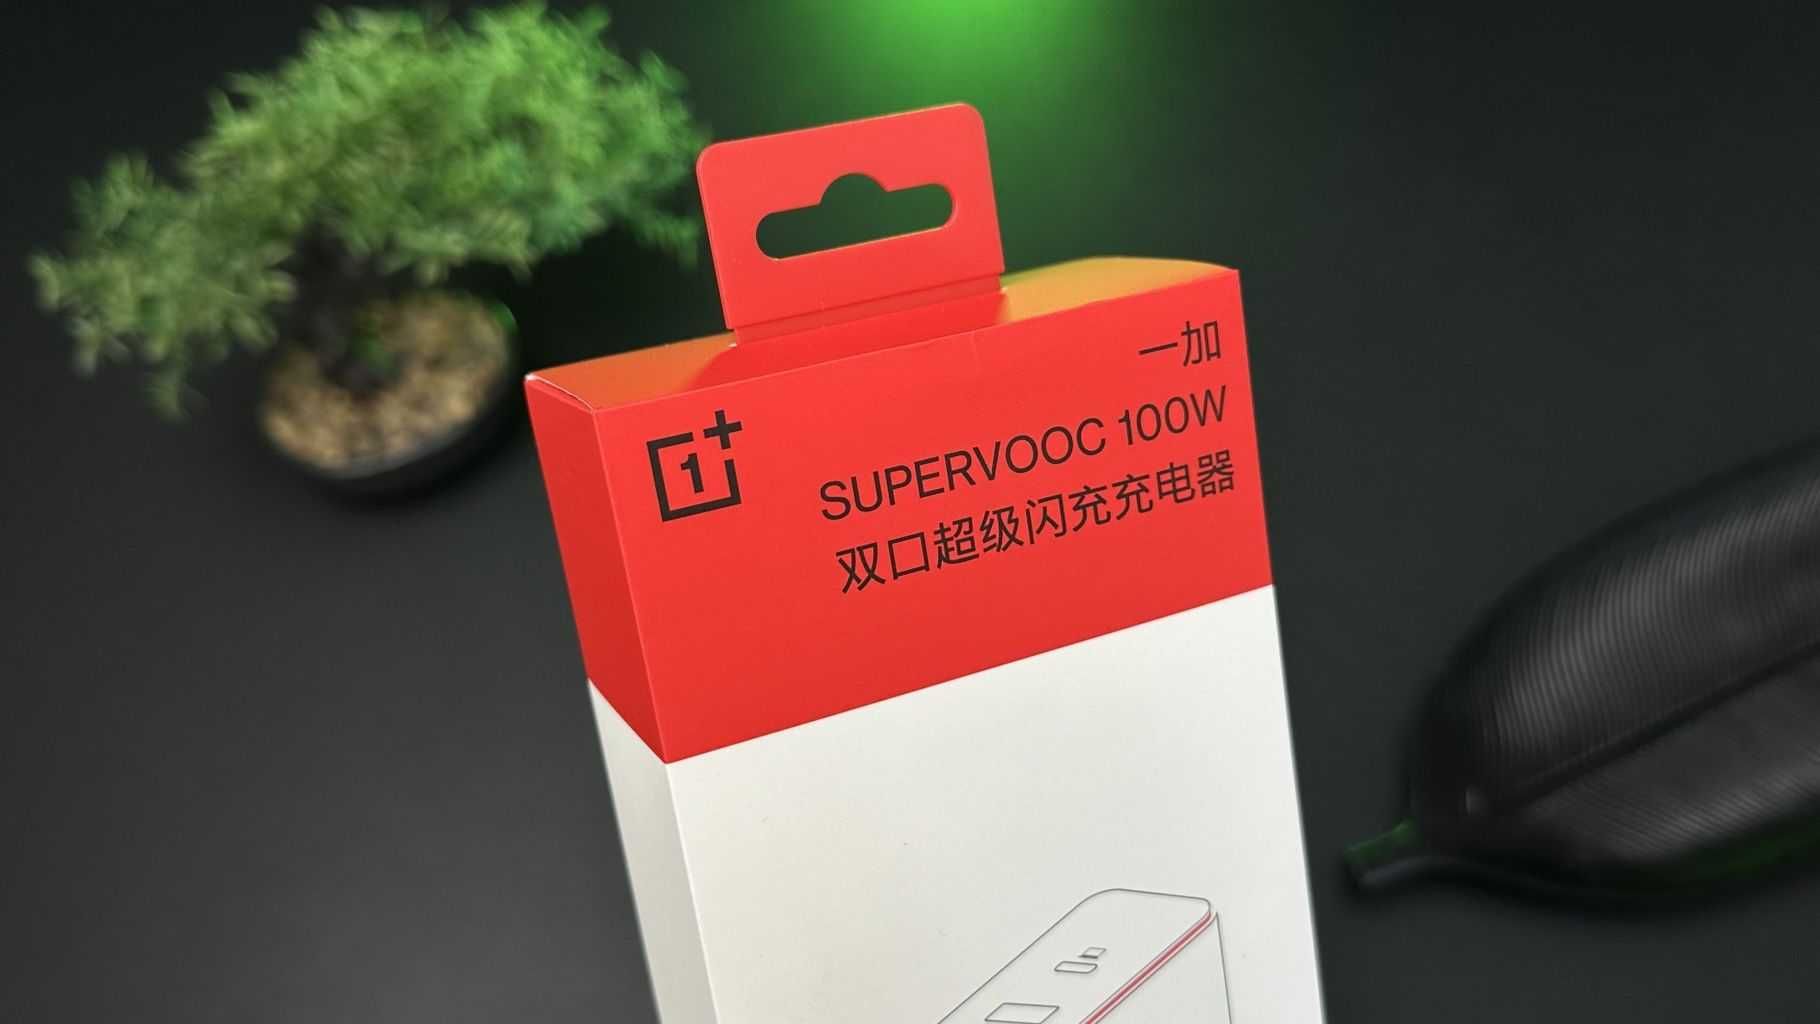 NEW OnePlus Supervooc 100W Power Adapter Suit 2in1 100W power adapter